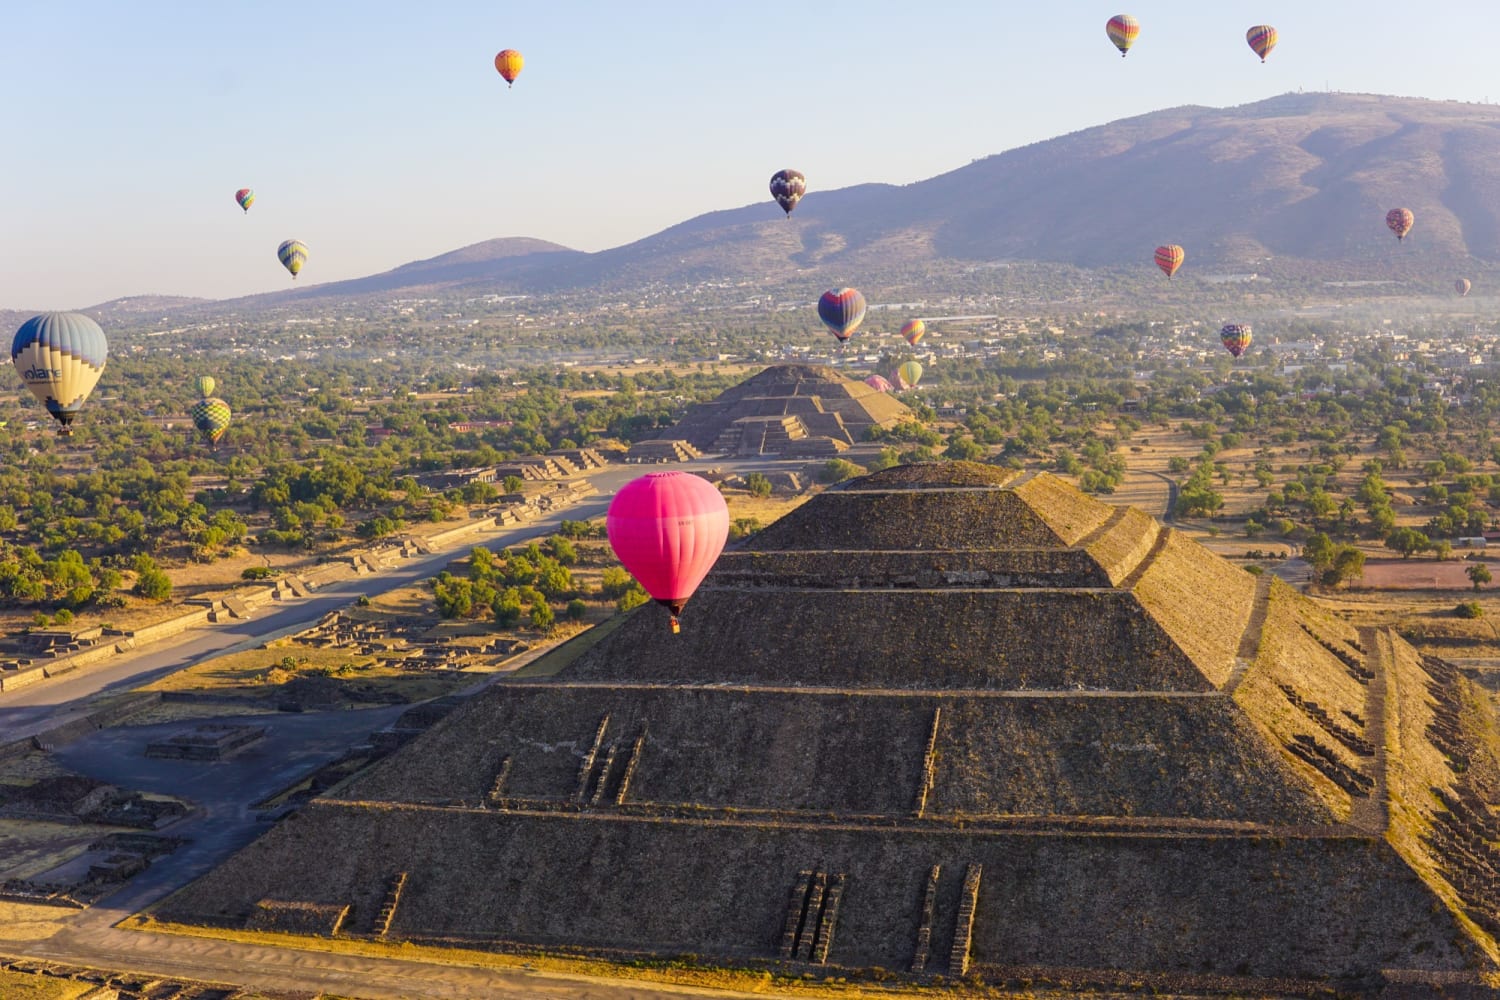 OC: I rode a hot air balloon over the pyramids of Teotihuacán